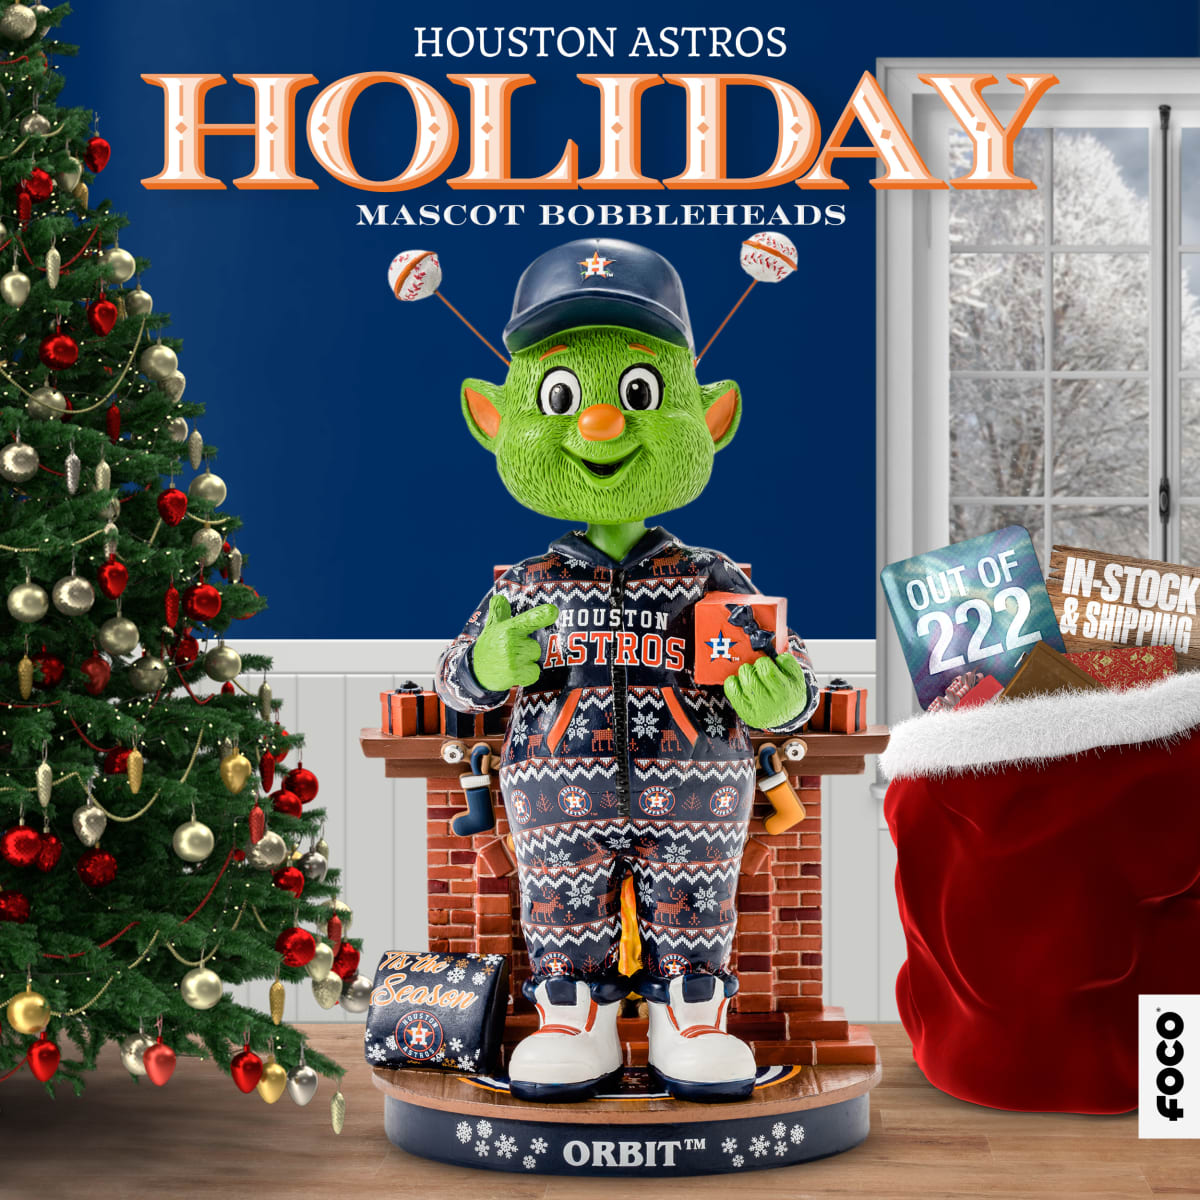 How to get your Christmas card photo taken with the Astros' Orbit